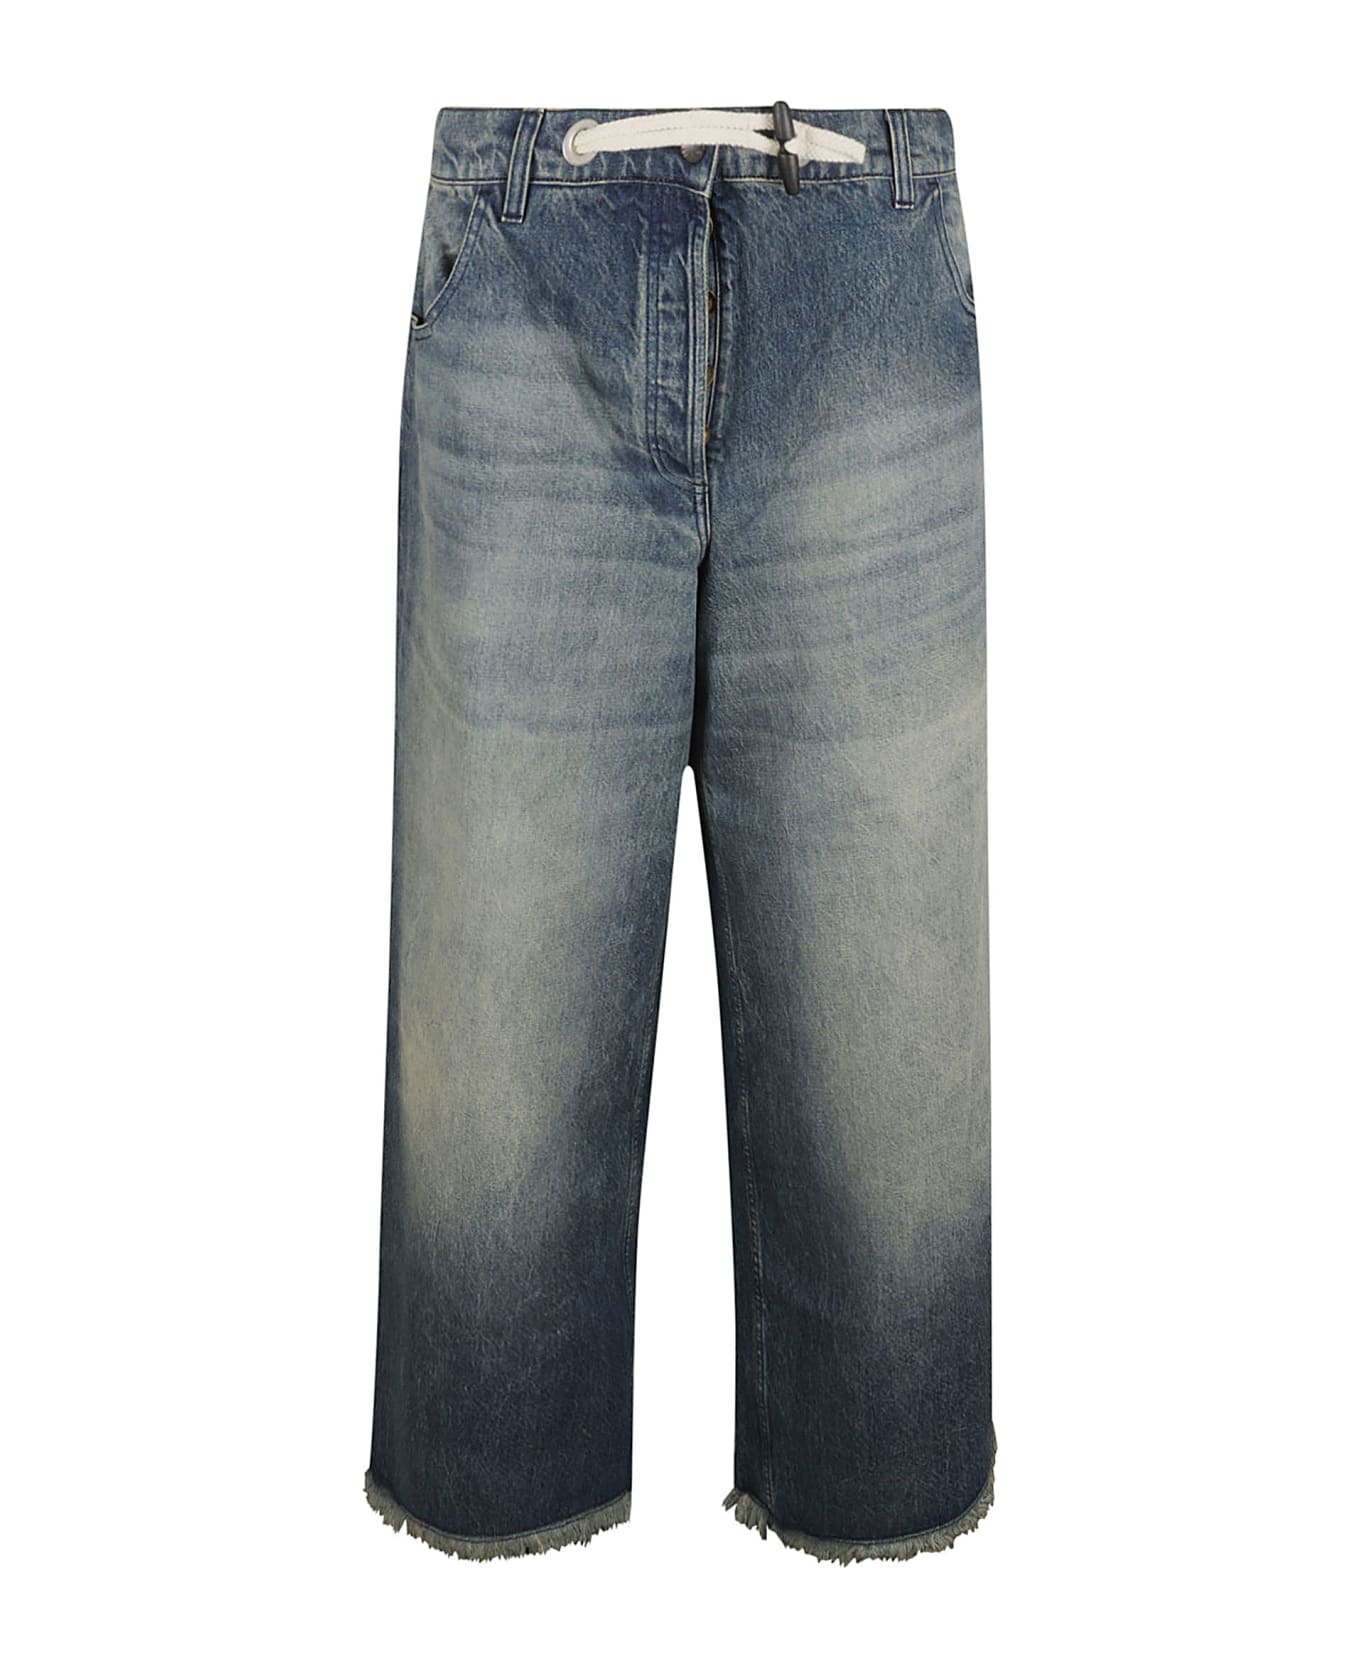 Moncler Genius Cropped Buttoned Jeans - Dark Blue